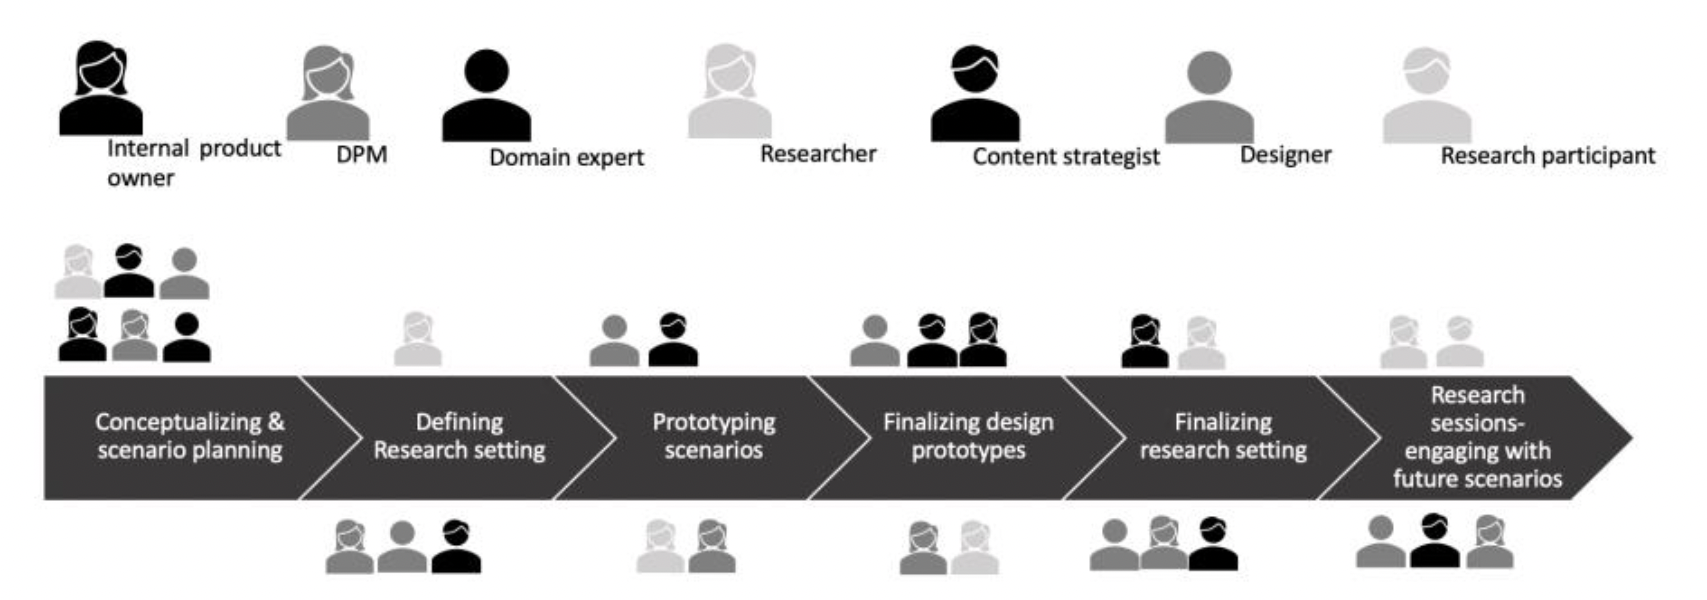 Figure shows different phases of a sample speculative design project. Players include internal product owner, program manager, domain expert, researcher, content designer, interaction designer, and researcher. Except in the conceptualizing and scenario planning step in which everyone plays an equal part, different functions have different roles and levels of involvement in different phases of the project.